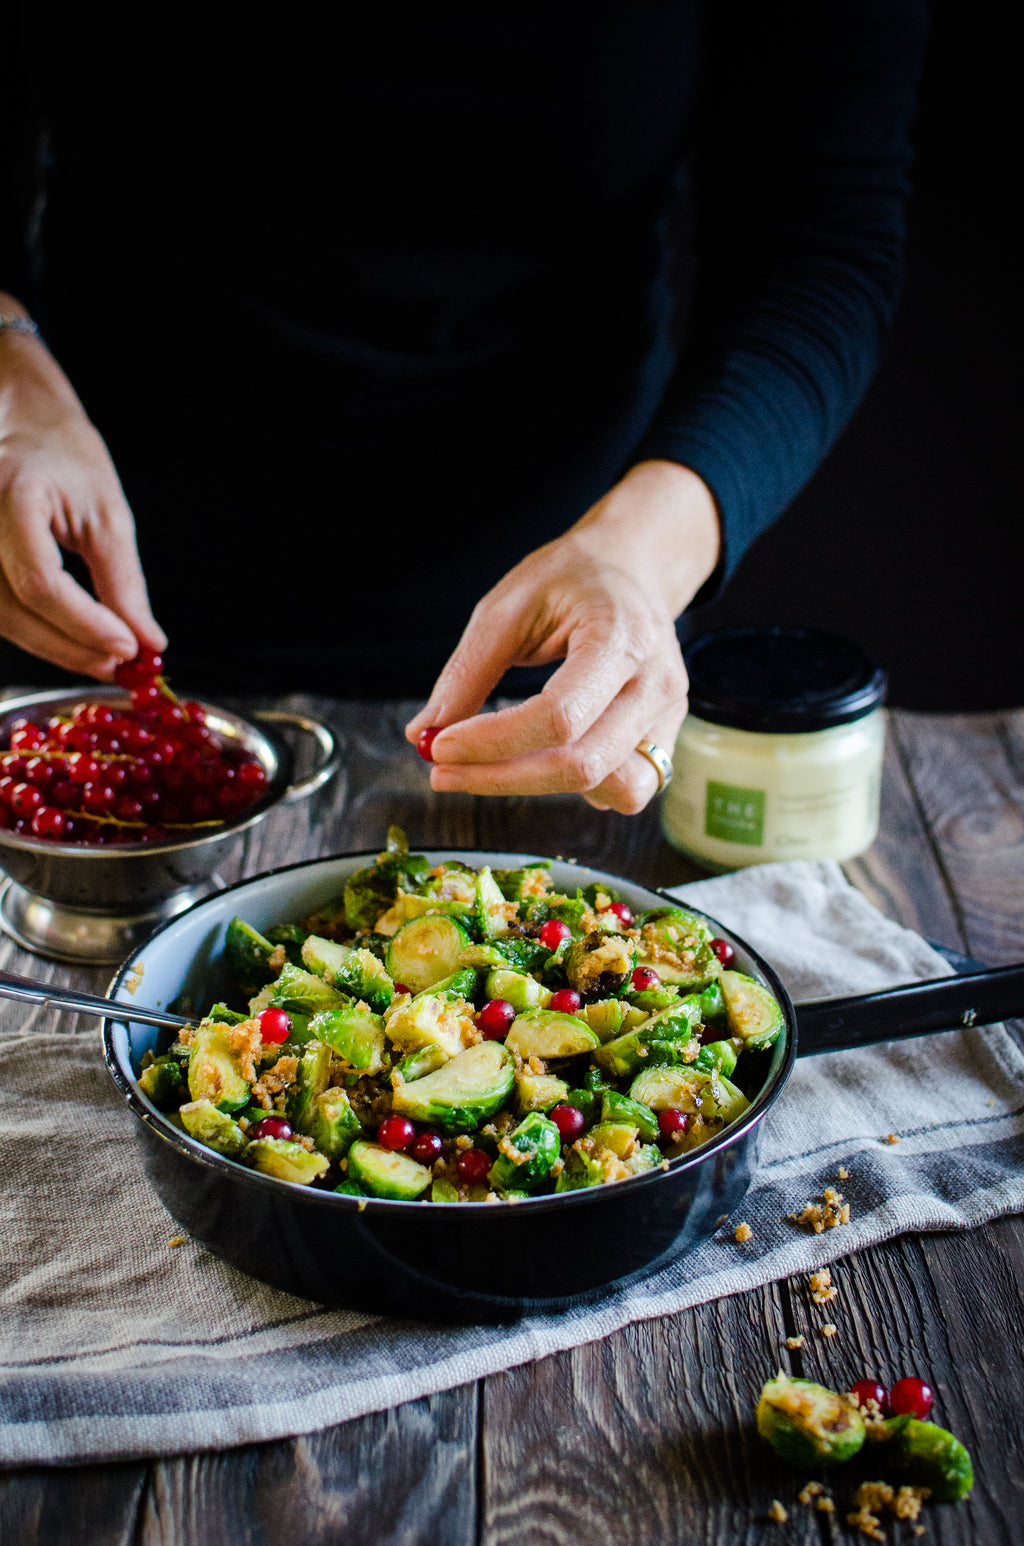 Crunchy Sprouts with Redcurrant Berries - Ossa Organic